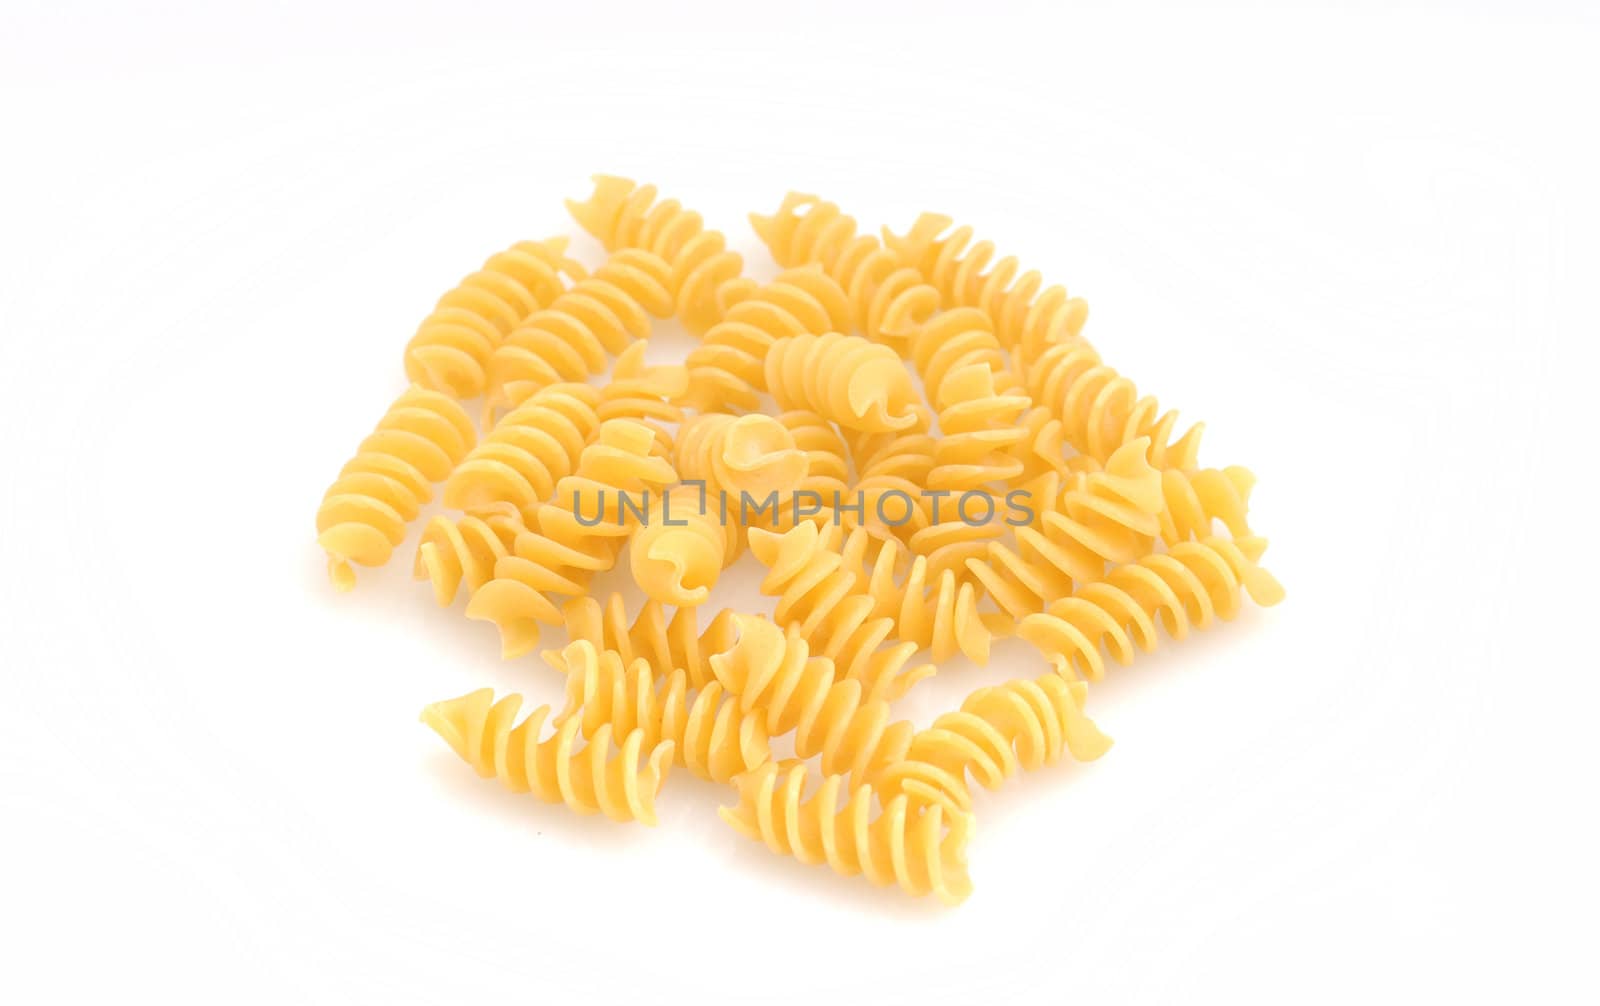 pasta on white background by ftlaudgirl